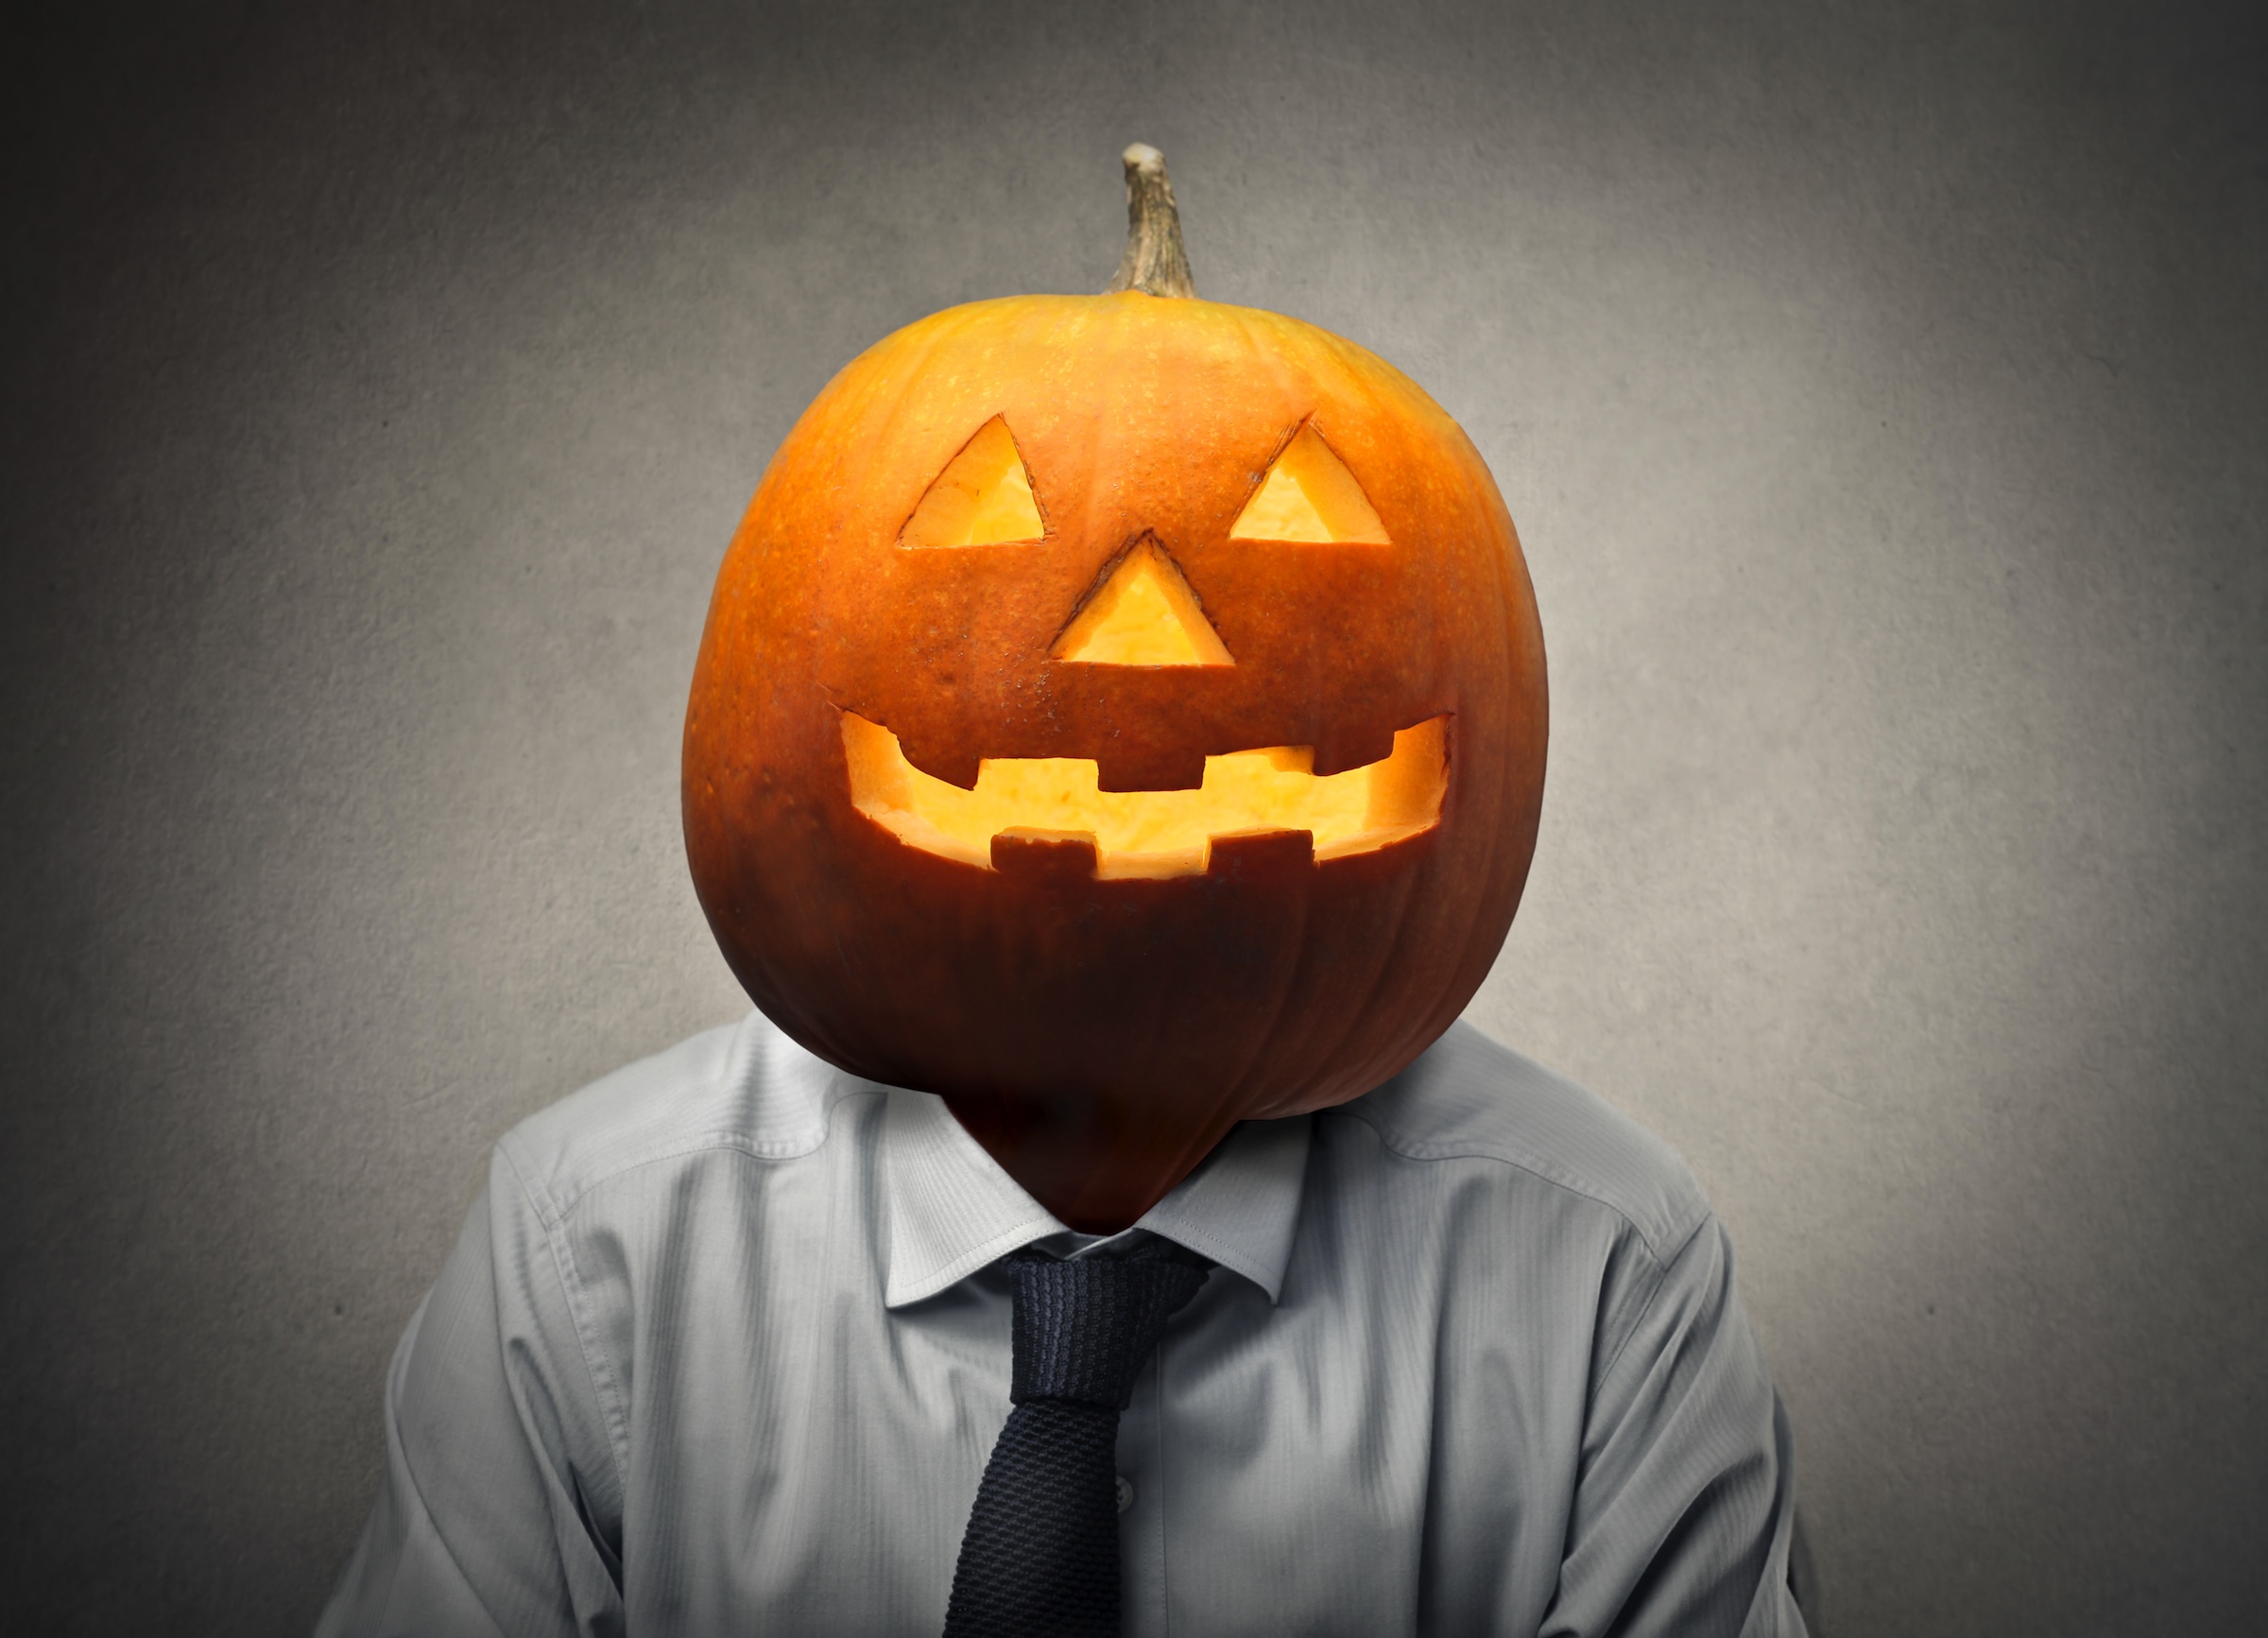 Small business owners can capitalize on Halloween fun